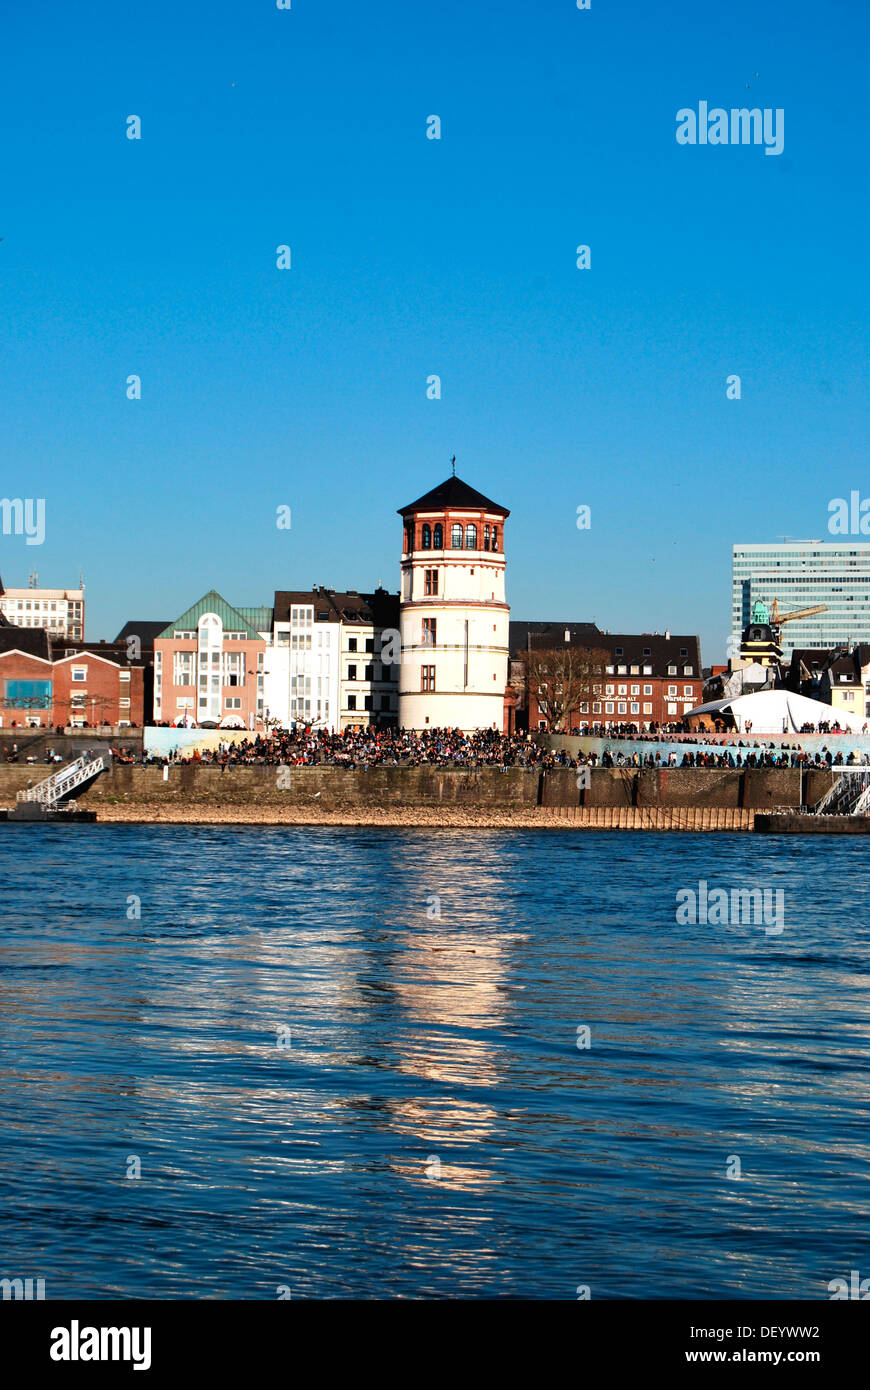 View across the Rhine River to Schlossturm tower, headquarters of the Schifffahrtsmuseum or Maritime Museum on the bank of the Stock Photo